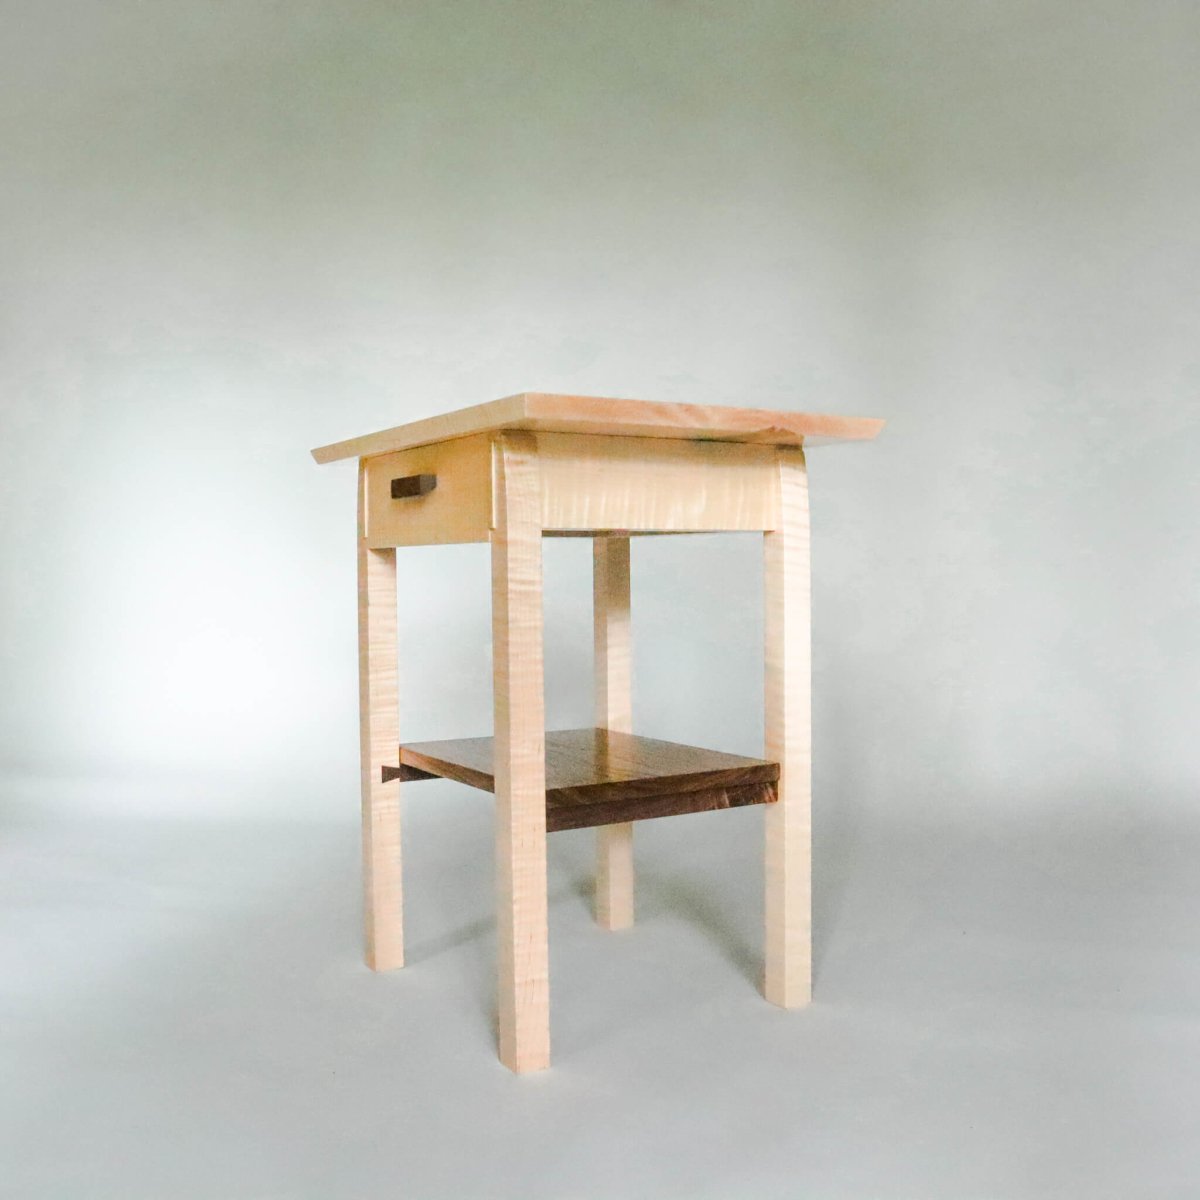 end table with storage, modern wood furniture design for bedroom decor by Mokuzai Furniture